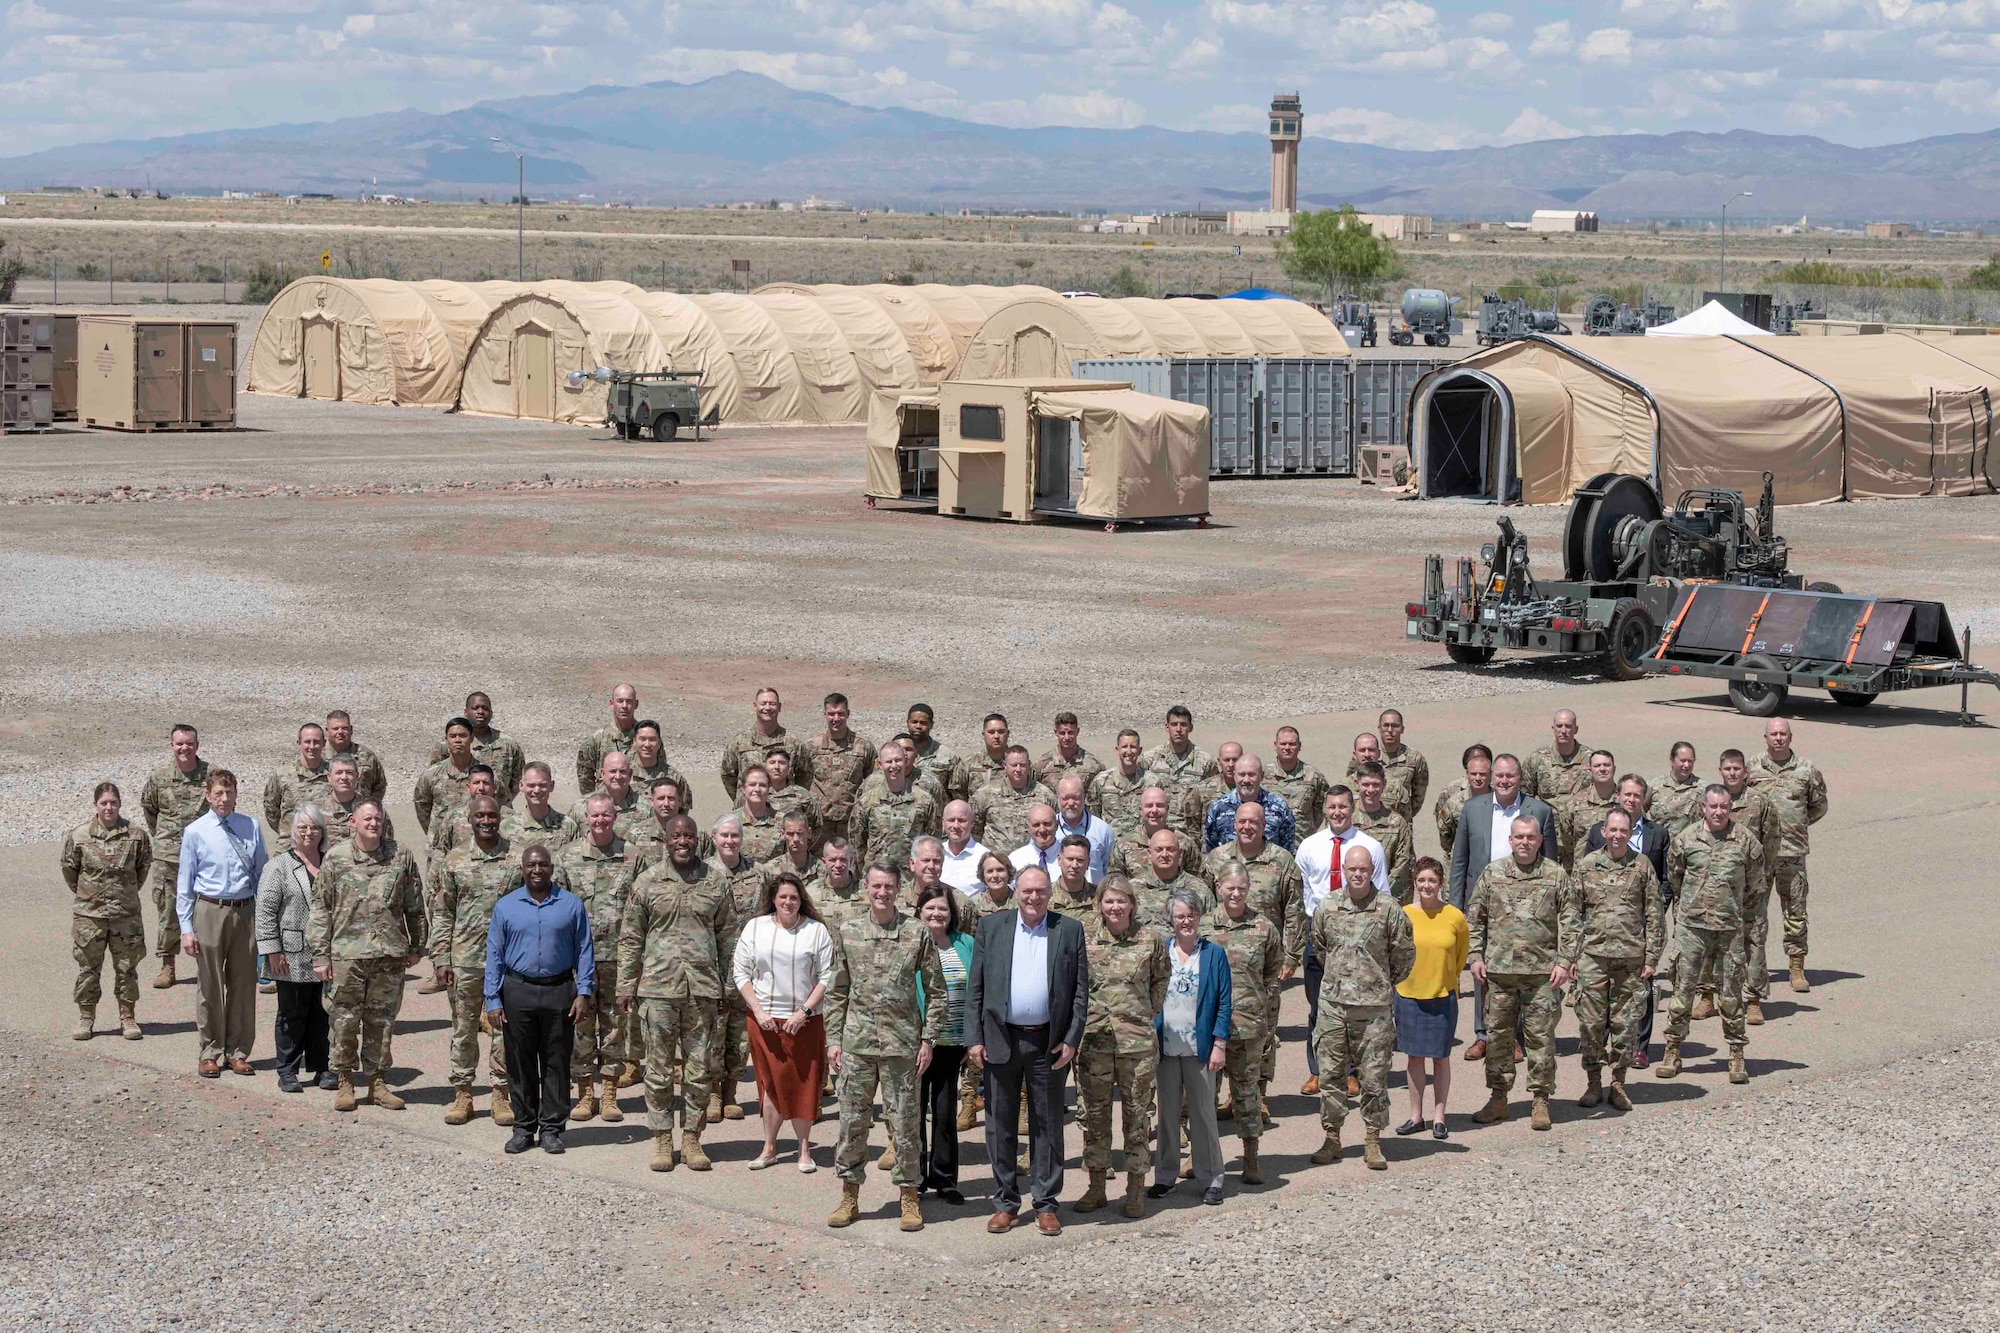 Members from the A4 Enterprise Council and the 635th Materiel Maintenance Group pose for a group photo at Holloman Air Force Base, New Mexico, May 23, 2023. The A4 Enterprise is a collaboration forum for the Department of the Air Force’s senior logistics, maintenance, engineering and security forces leaders. (U.S. Air Force photo Senior Airman Antonio Salfran)